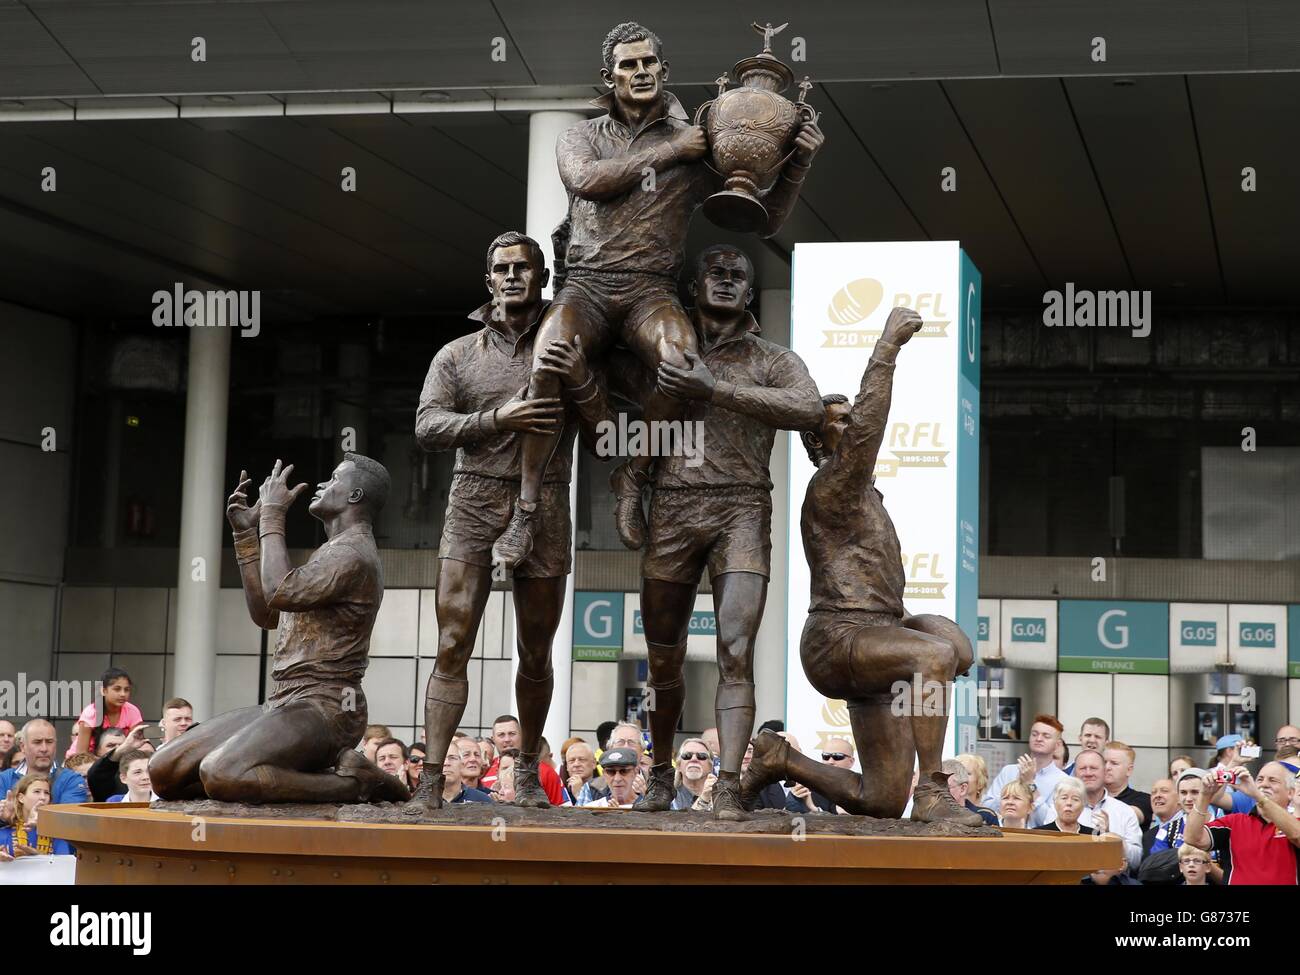 The statue of Rugby League legends Martin Offiah, Alex Murphy, Billy Boston, Eric Ashton and Gus Risman is unveiled at Wembley Stadium before the Ladbrokes Challenge Cup Final at Wembley Stadium, London. PRESS ASSOCIATION Photo. Picture date: Saturday August 29, 2015. See PA story RUGBYL Final. Photo credit should read: Paul Harding/PA Wire. RESTRICTIONS: . No commercial use. No false commercial association. No video emulation. No manipulation of images. Stock Photo